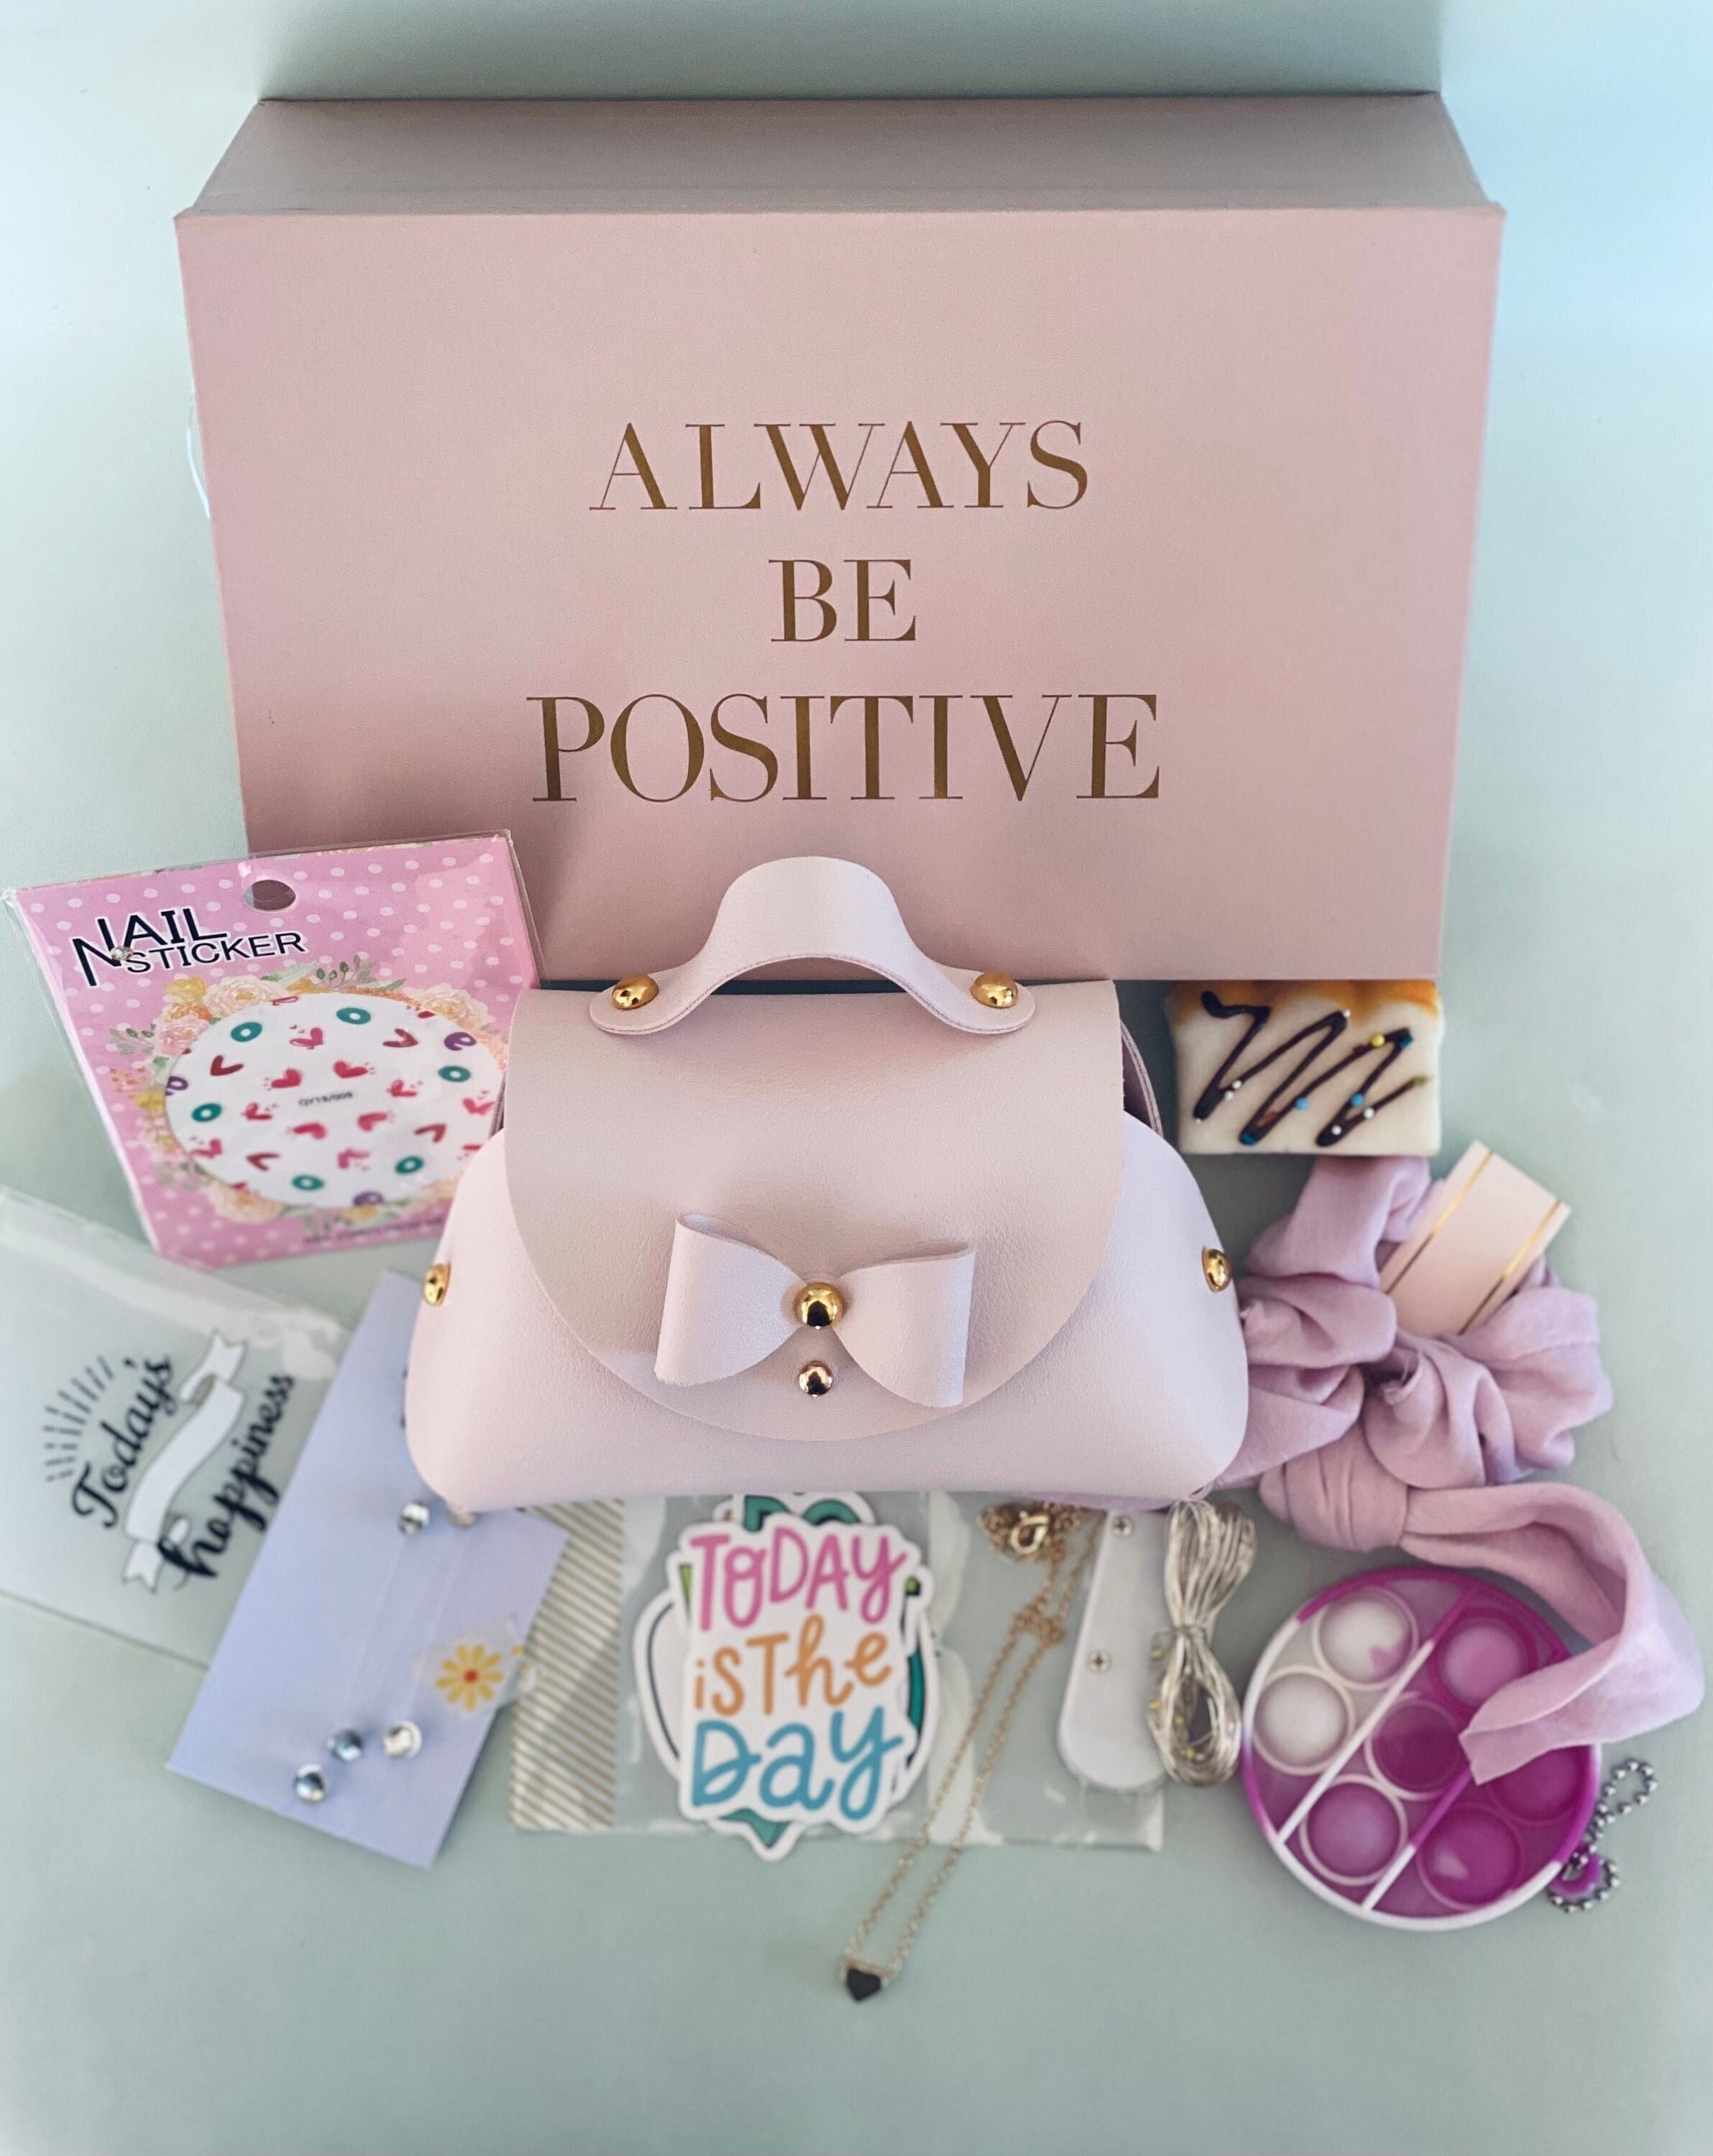 Pin on Gifts for Girls • Gifts for Her